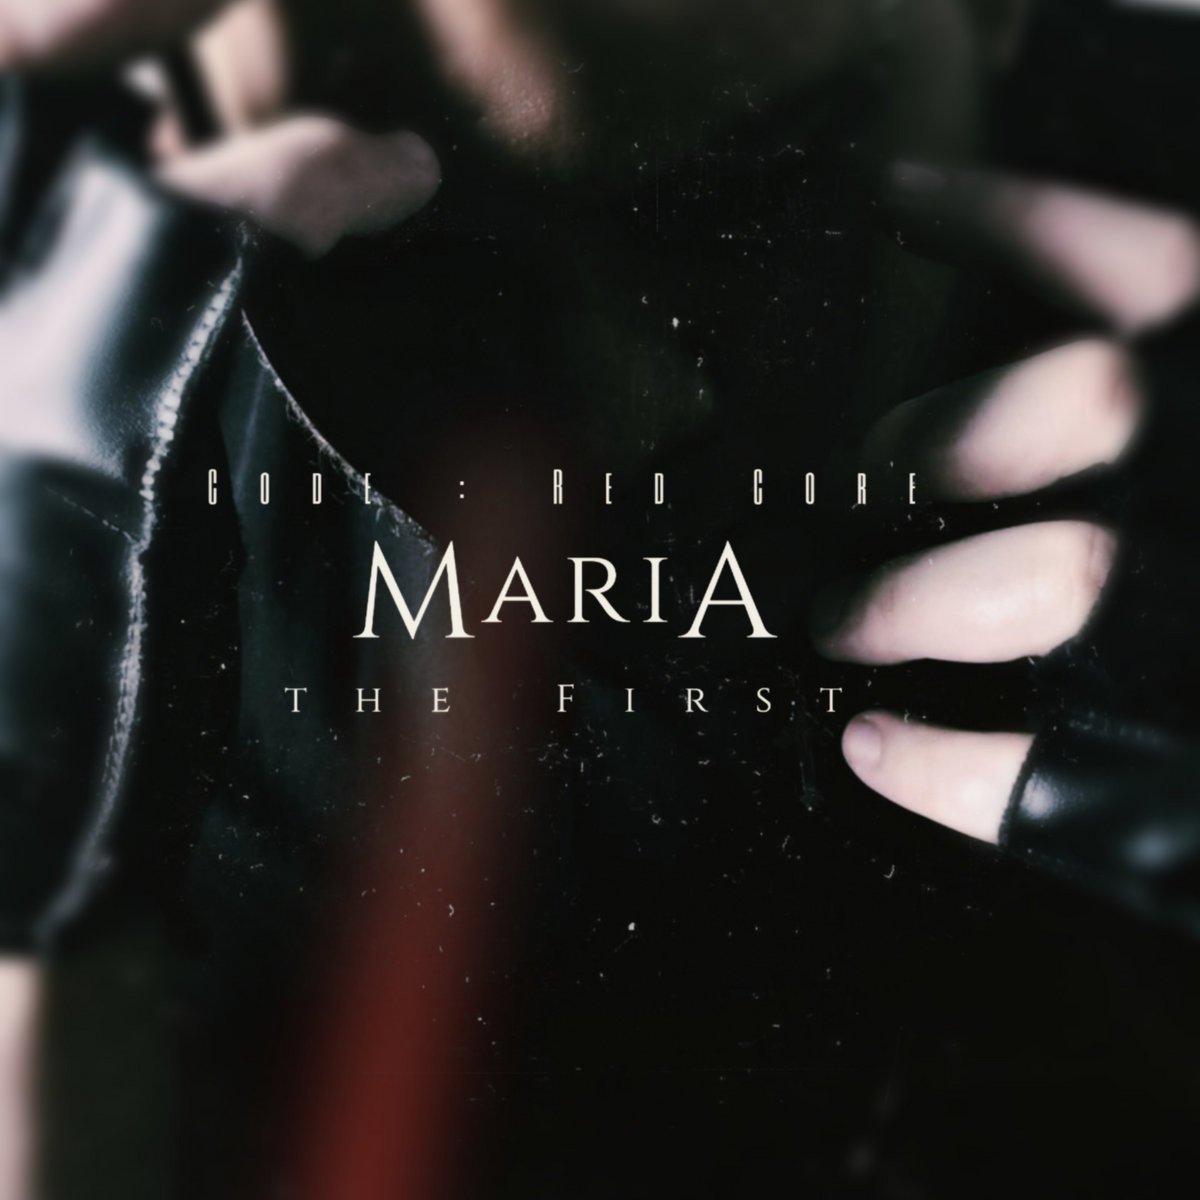 Maria the first